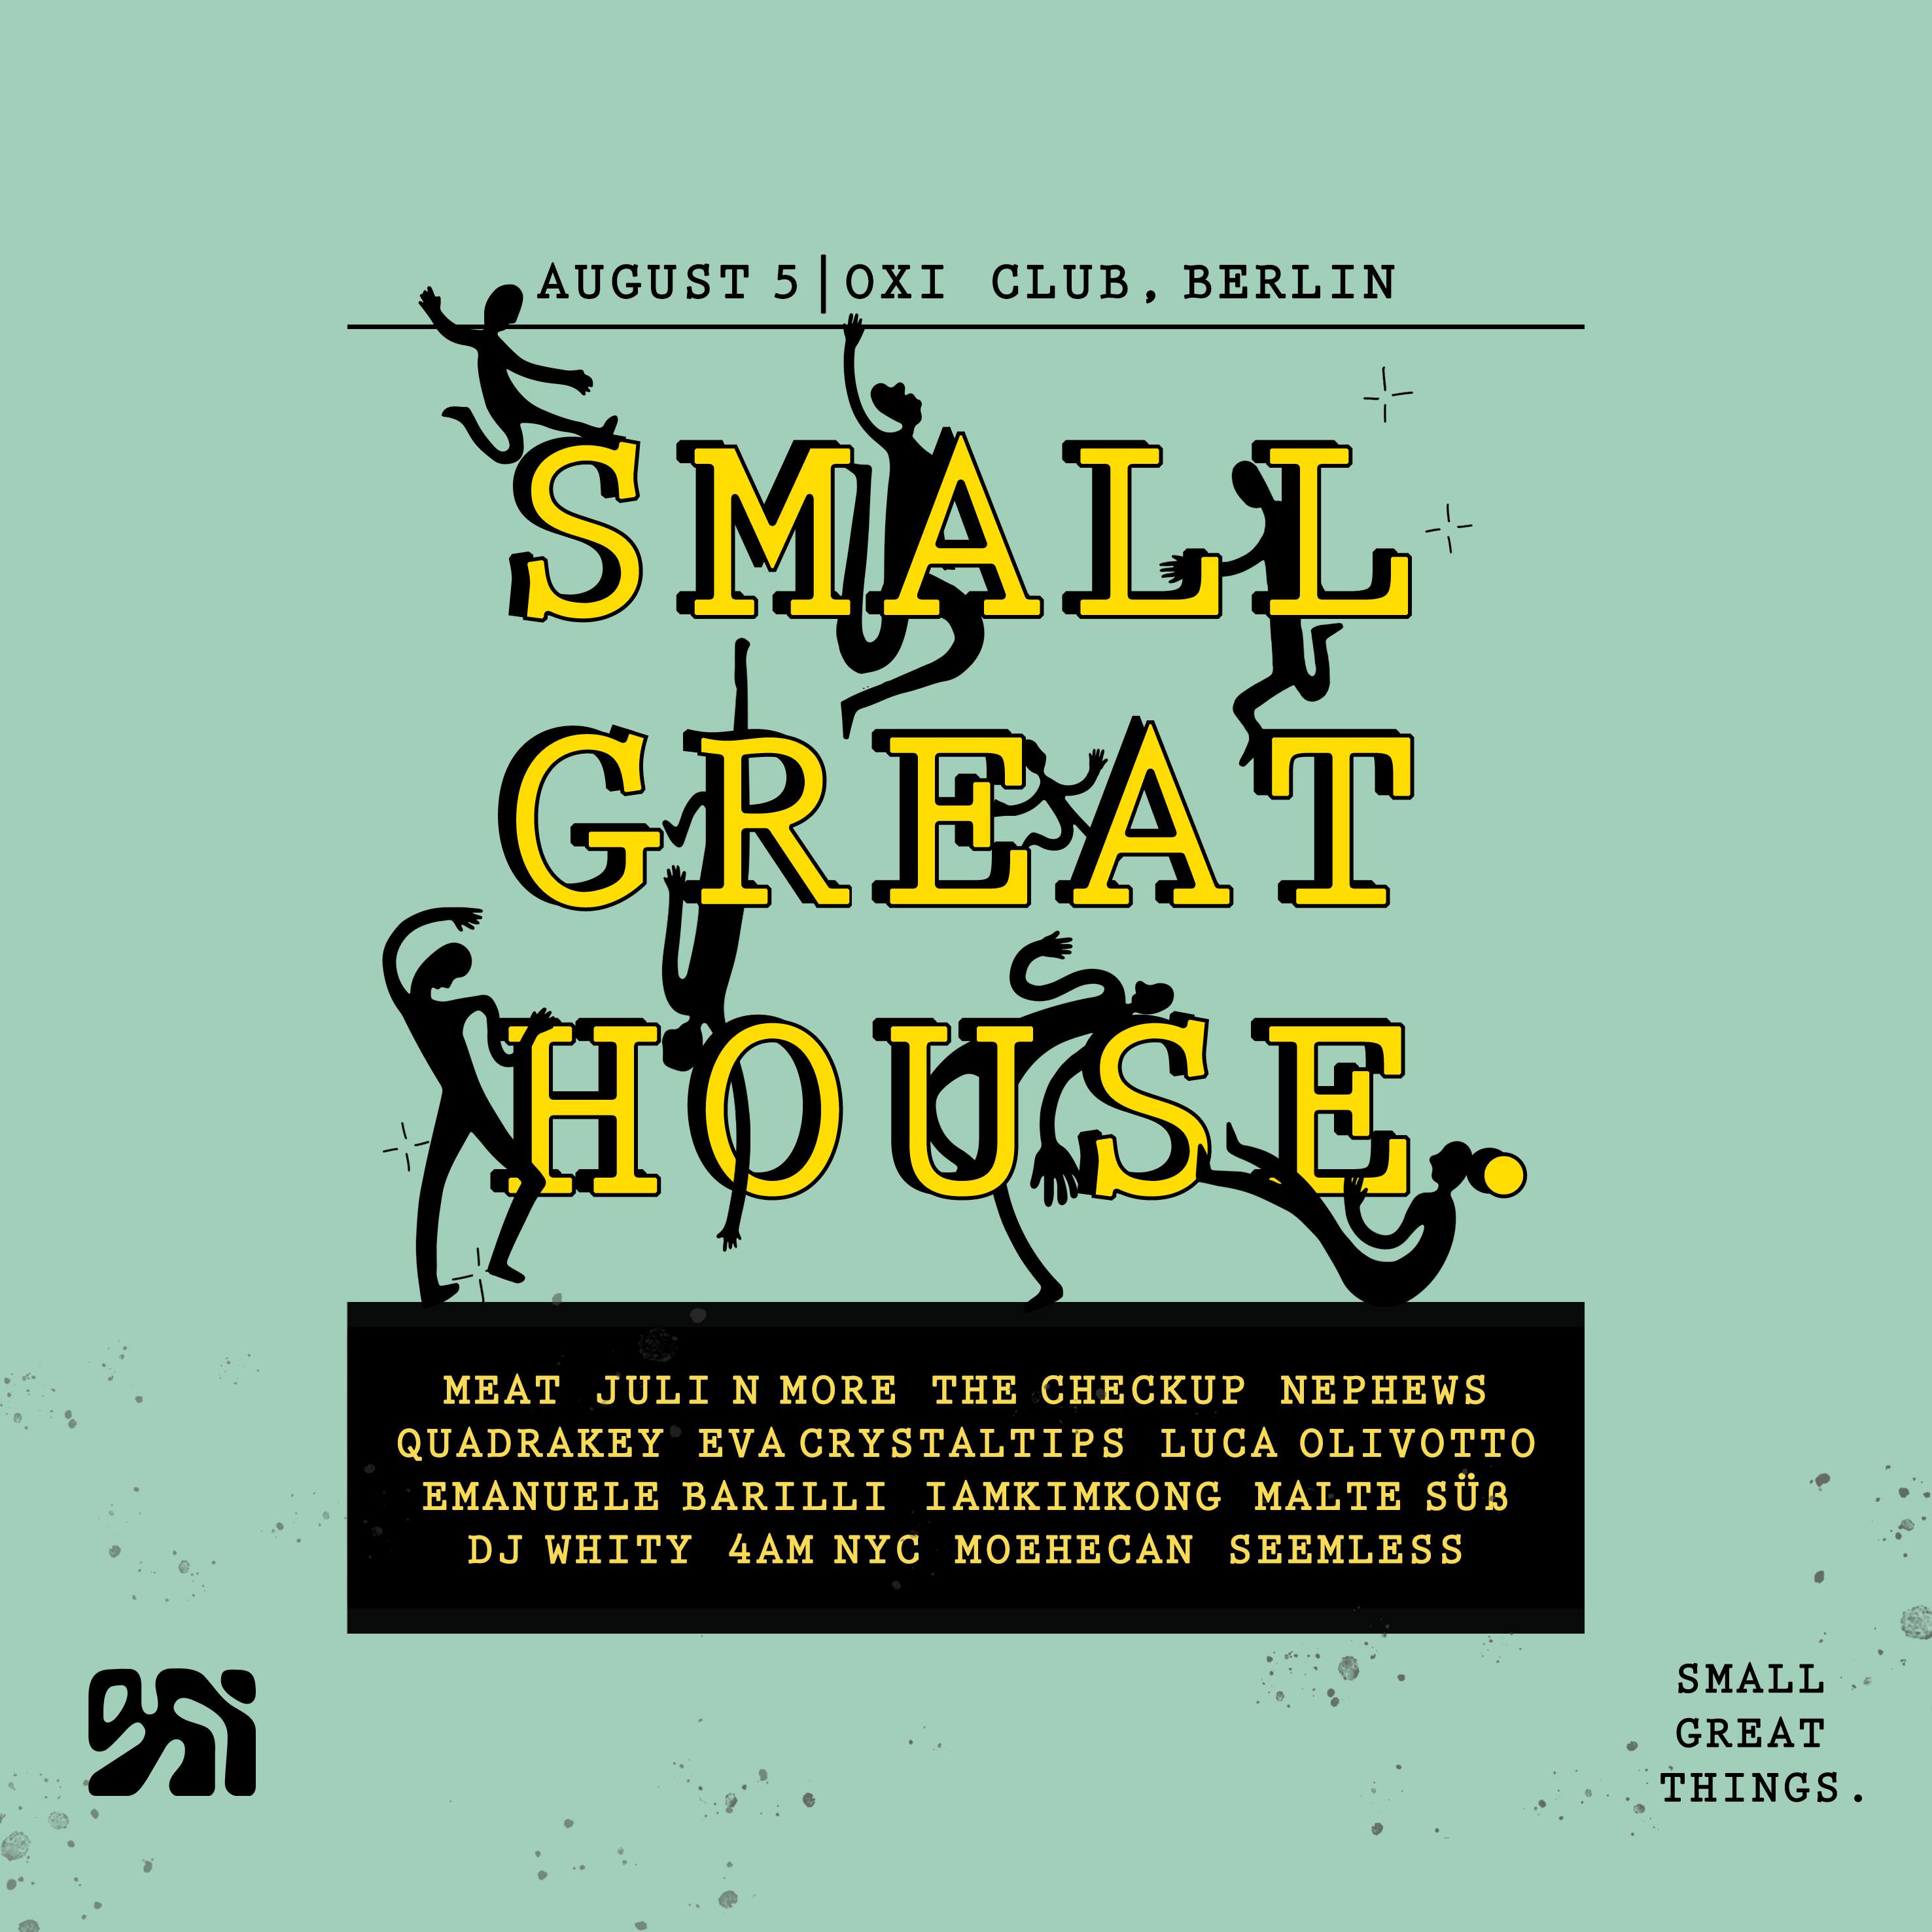 Small Great House (Small Great Things. OPEN AIR + INDOOR) - フライヤー裏